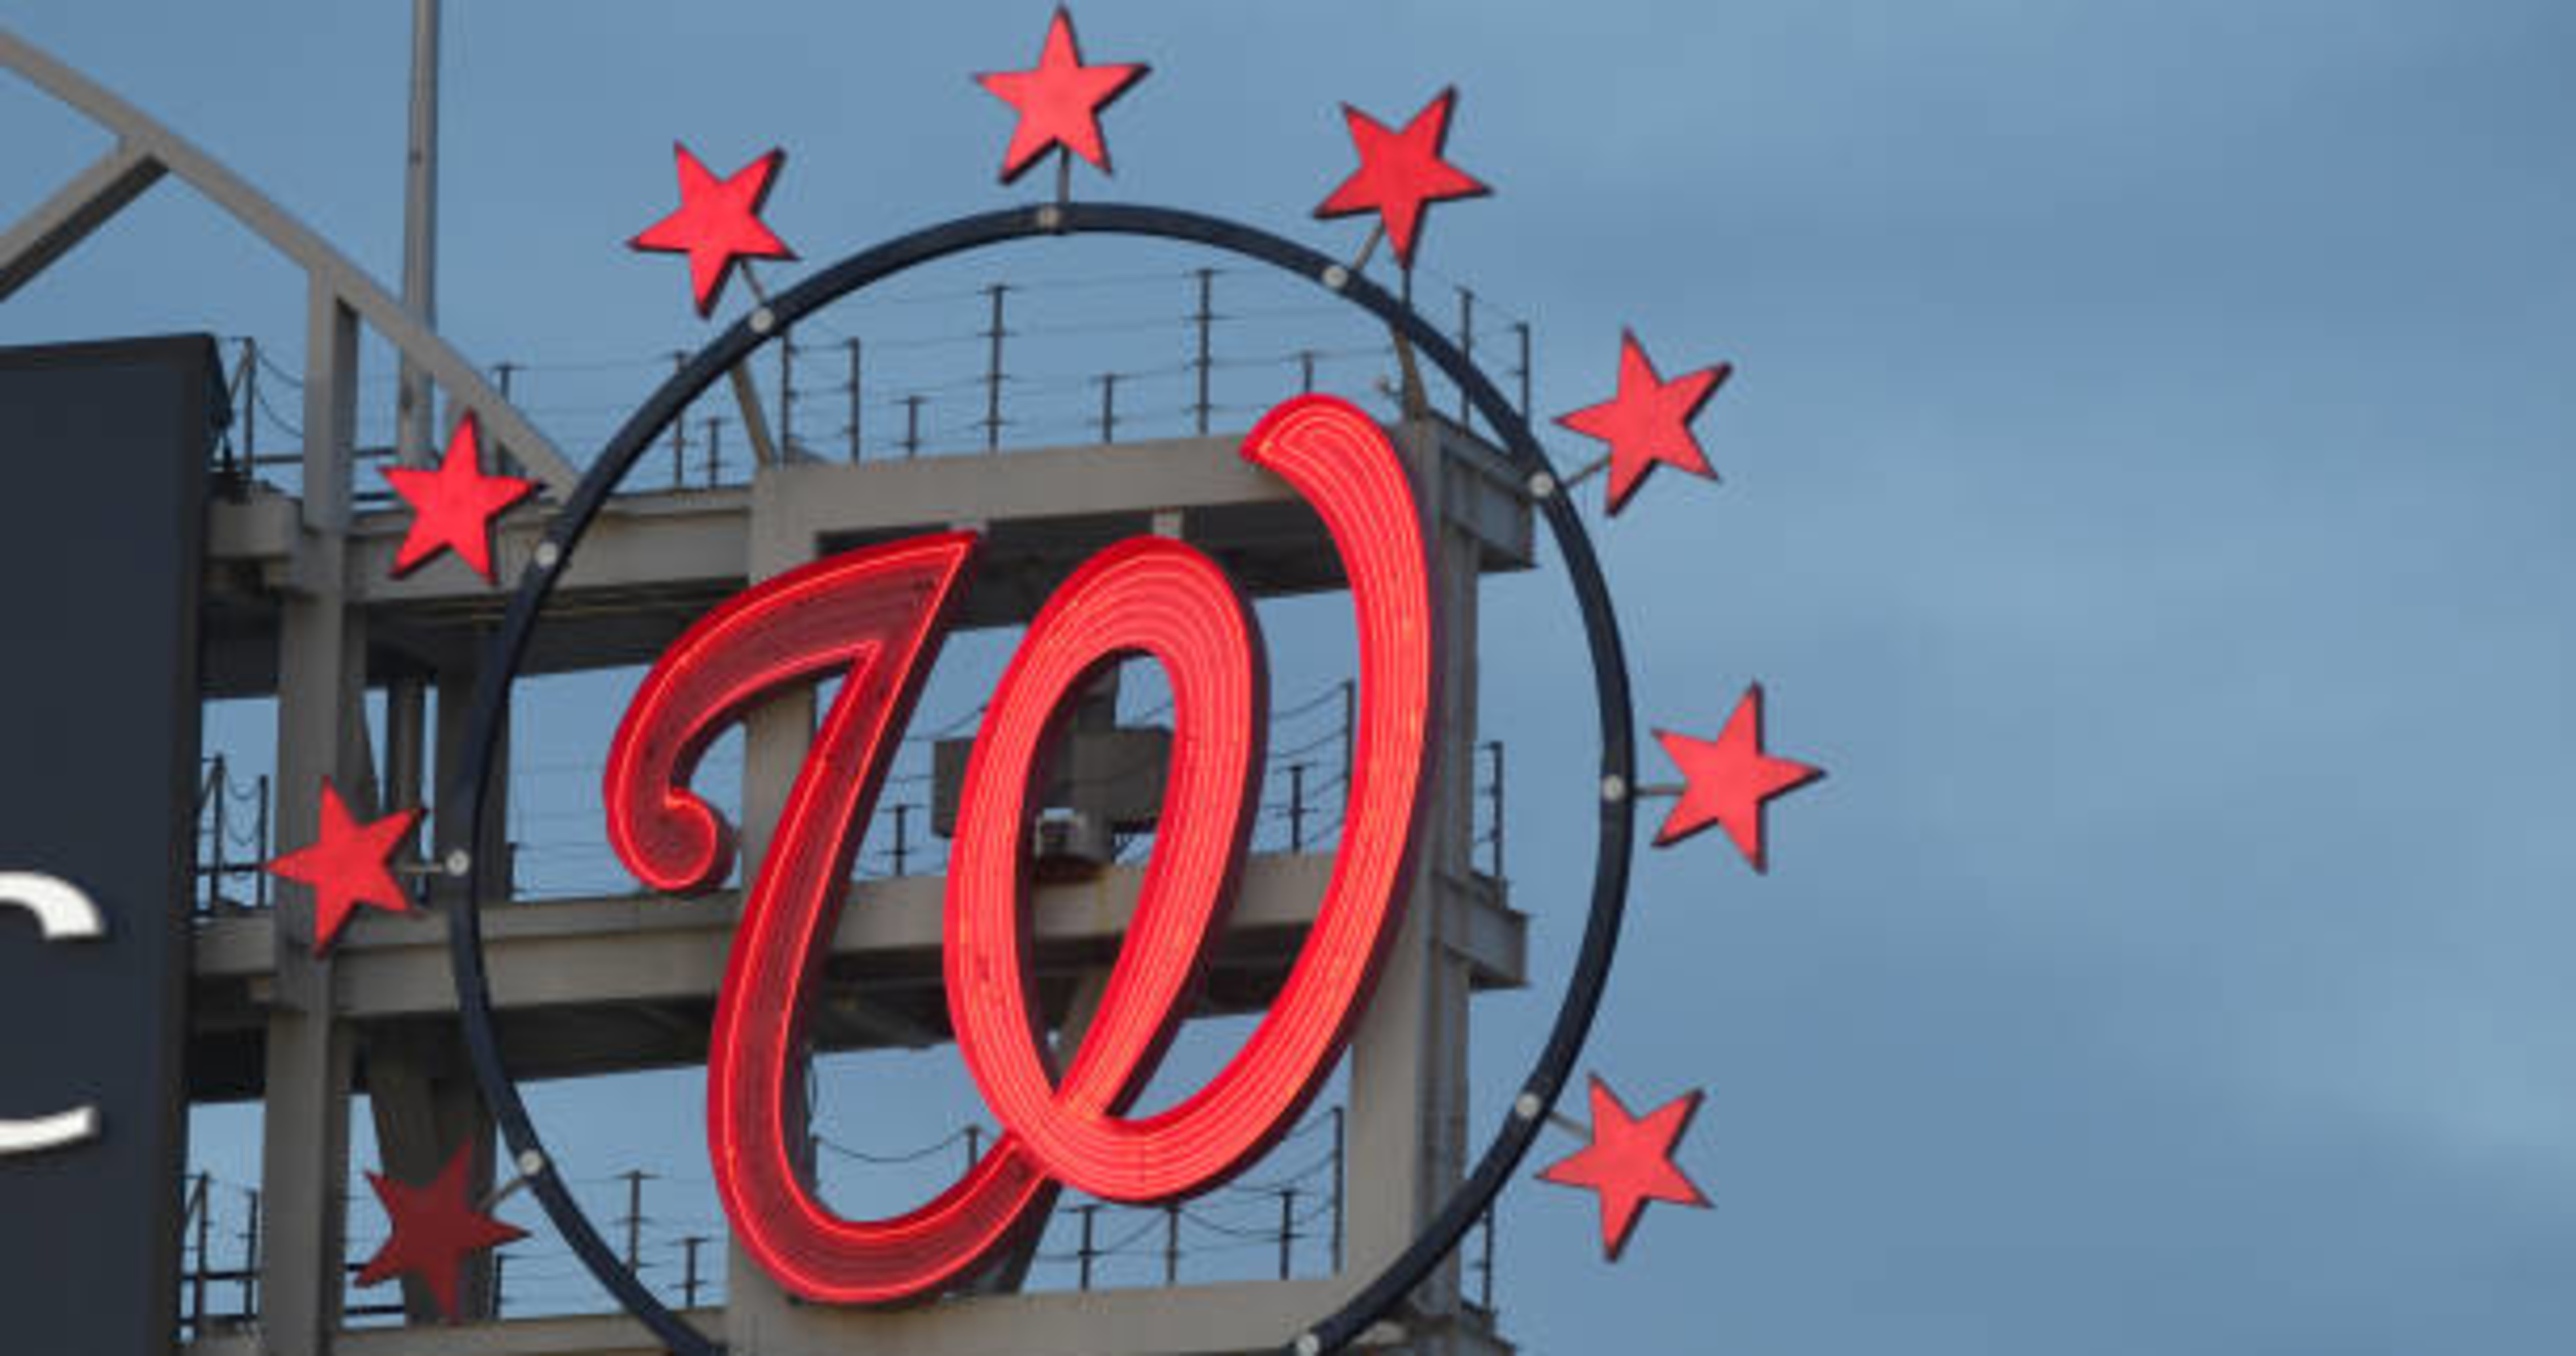 Mets vs. Nationals 2021 Opening Day Postponed Amid COVID19 Issues